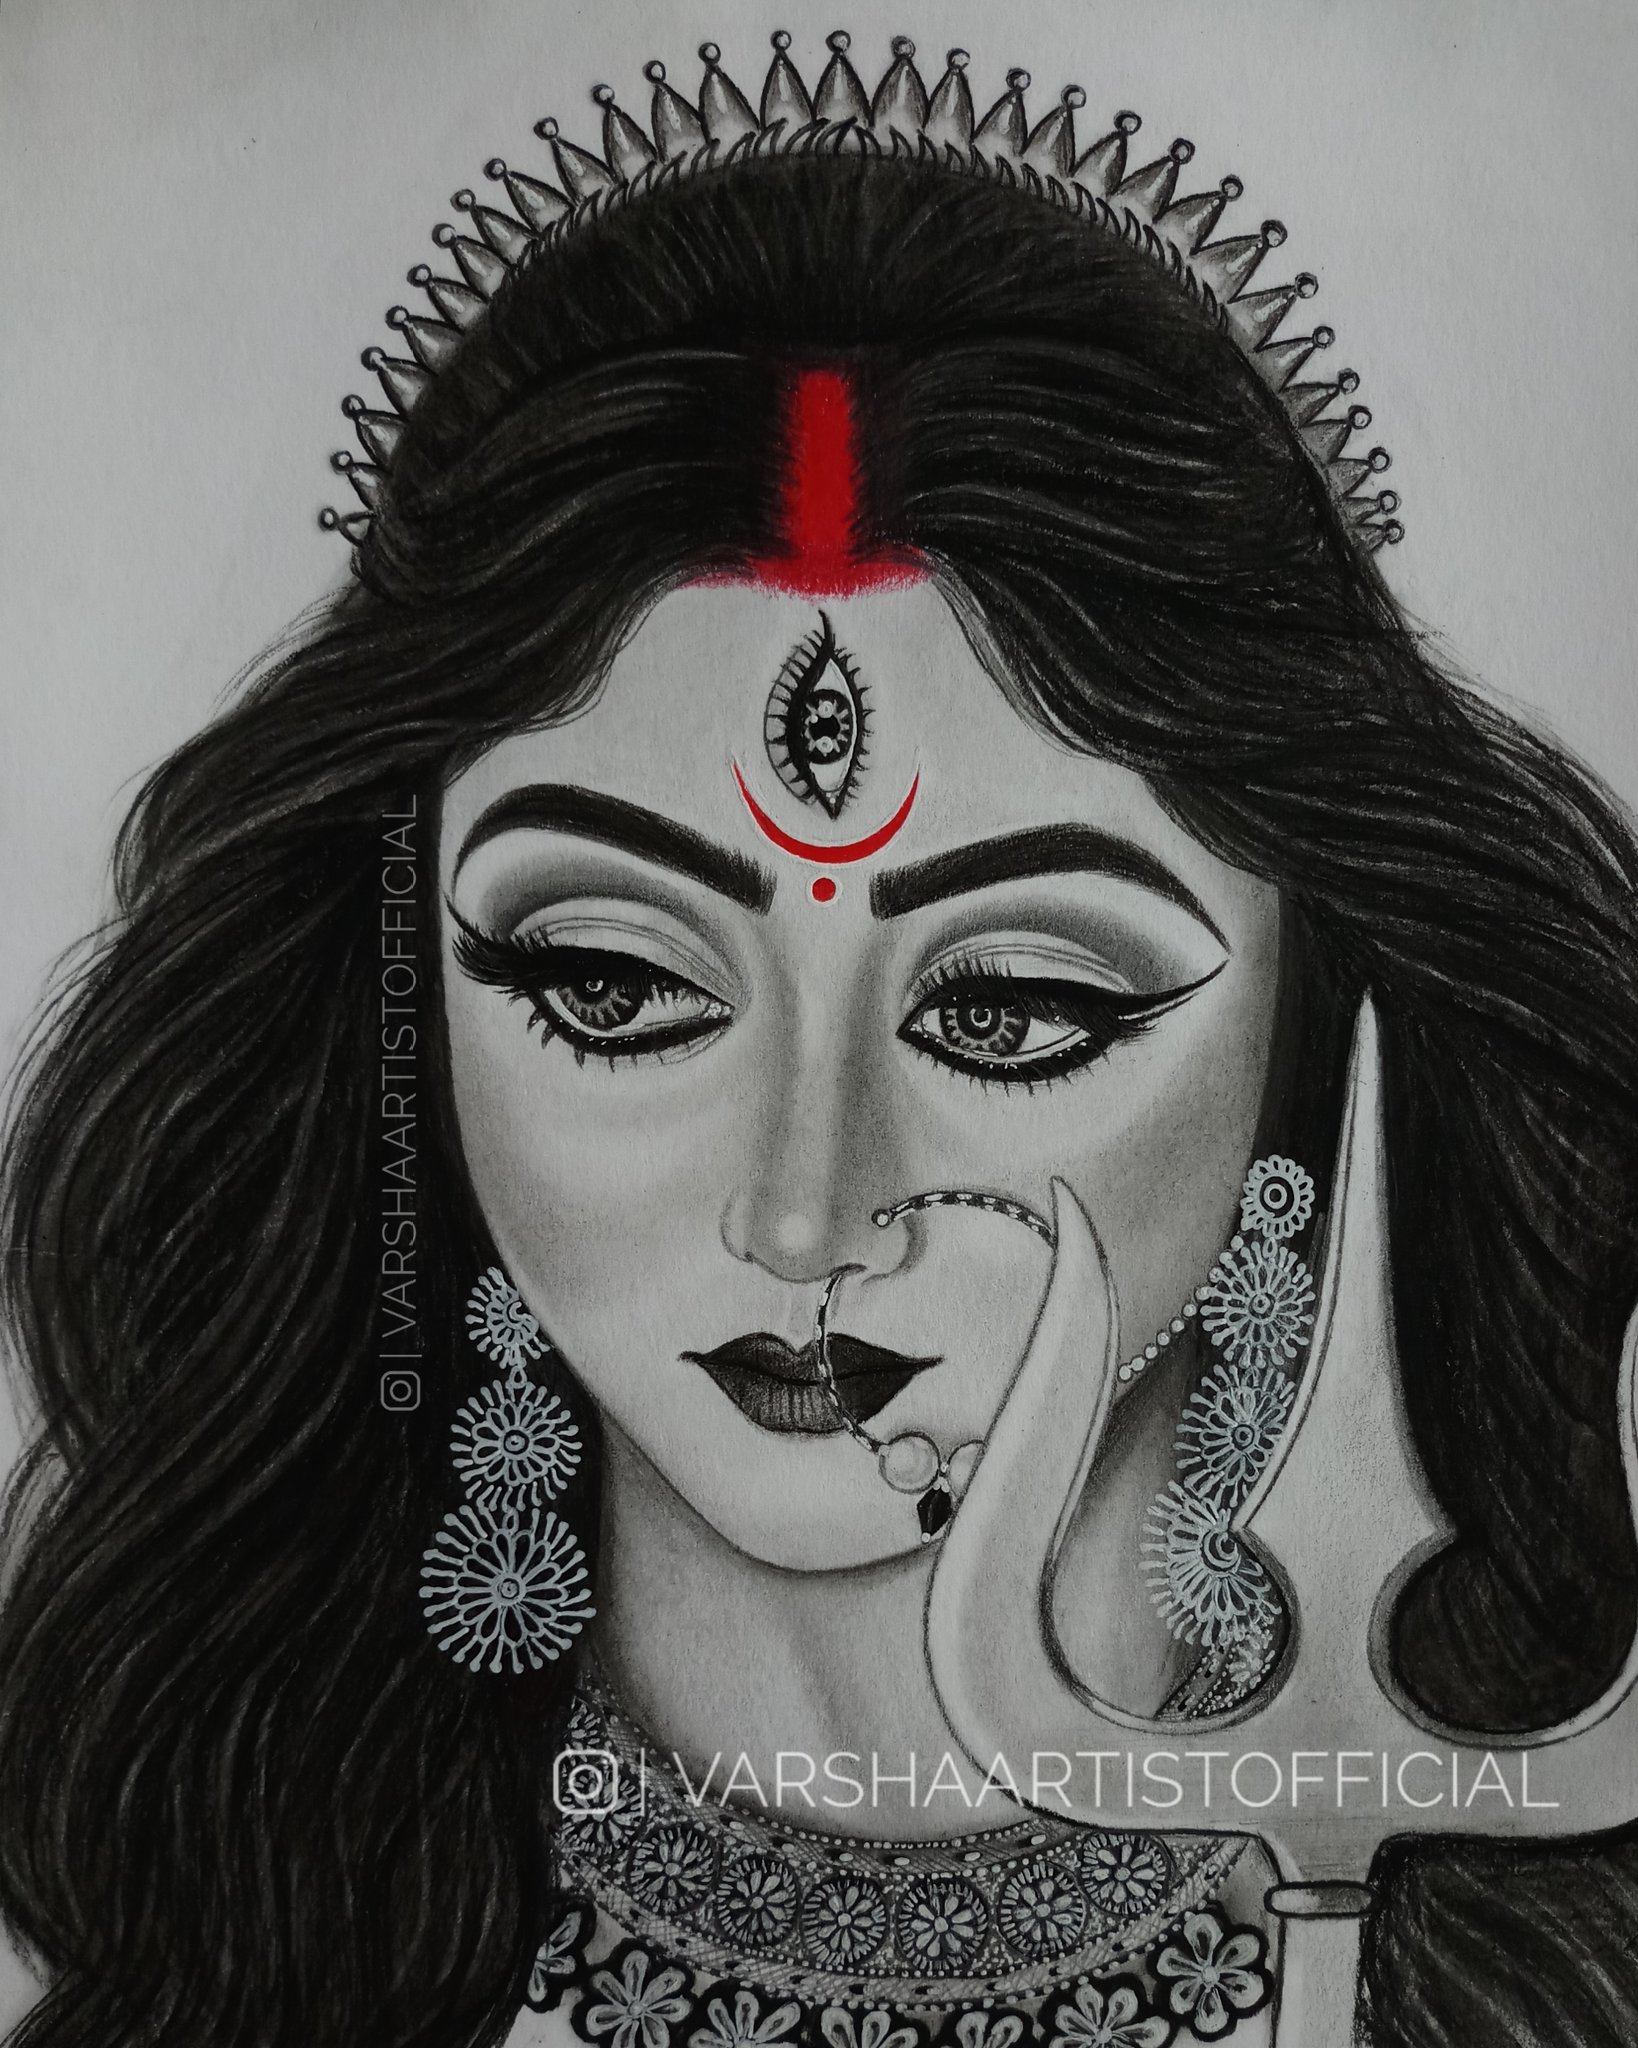 Durga Maa Drawing 🌺🙏 Full Tutorial Is On My YouTube Channel - Ruksar  creations (Link given in bio) Artist- @ruksar_creations Dm to... | Instagram